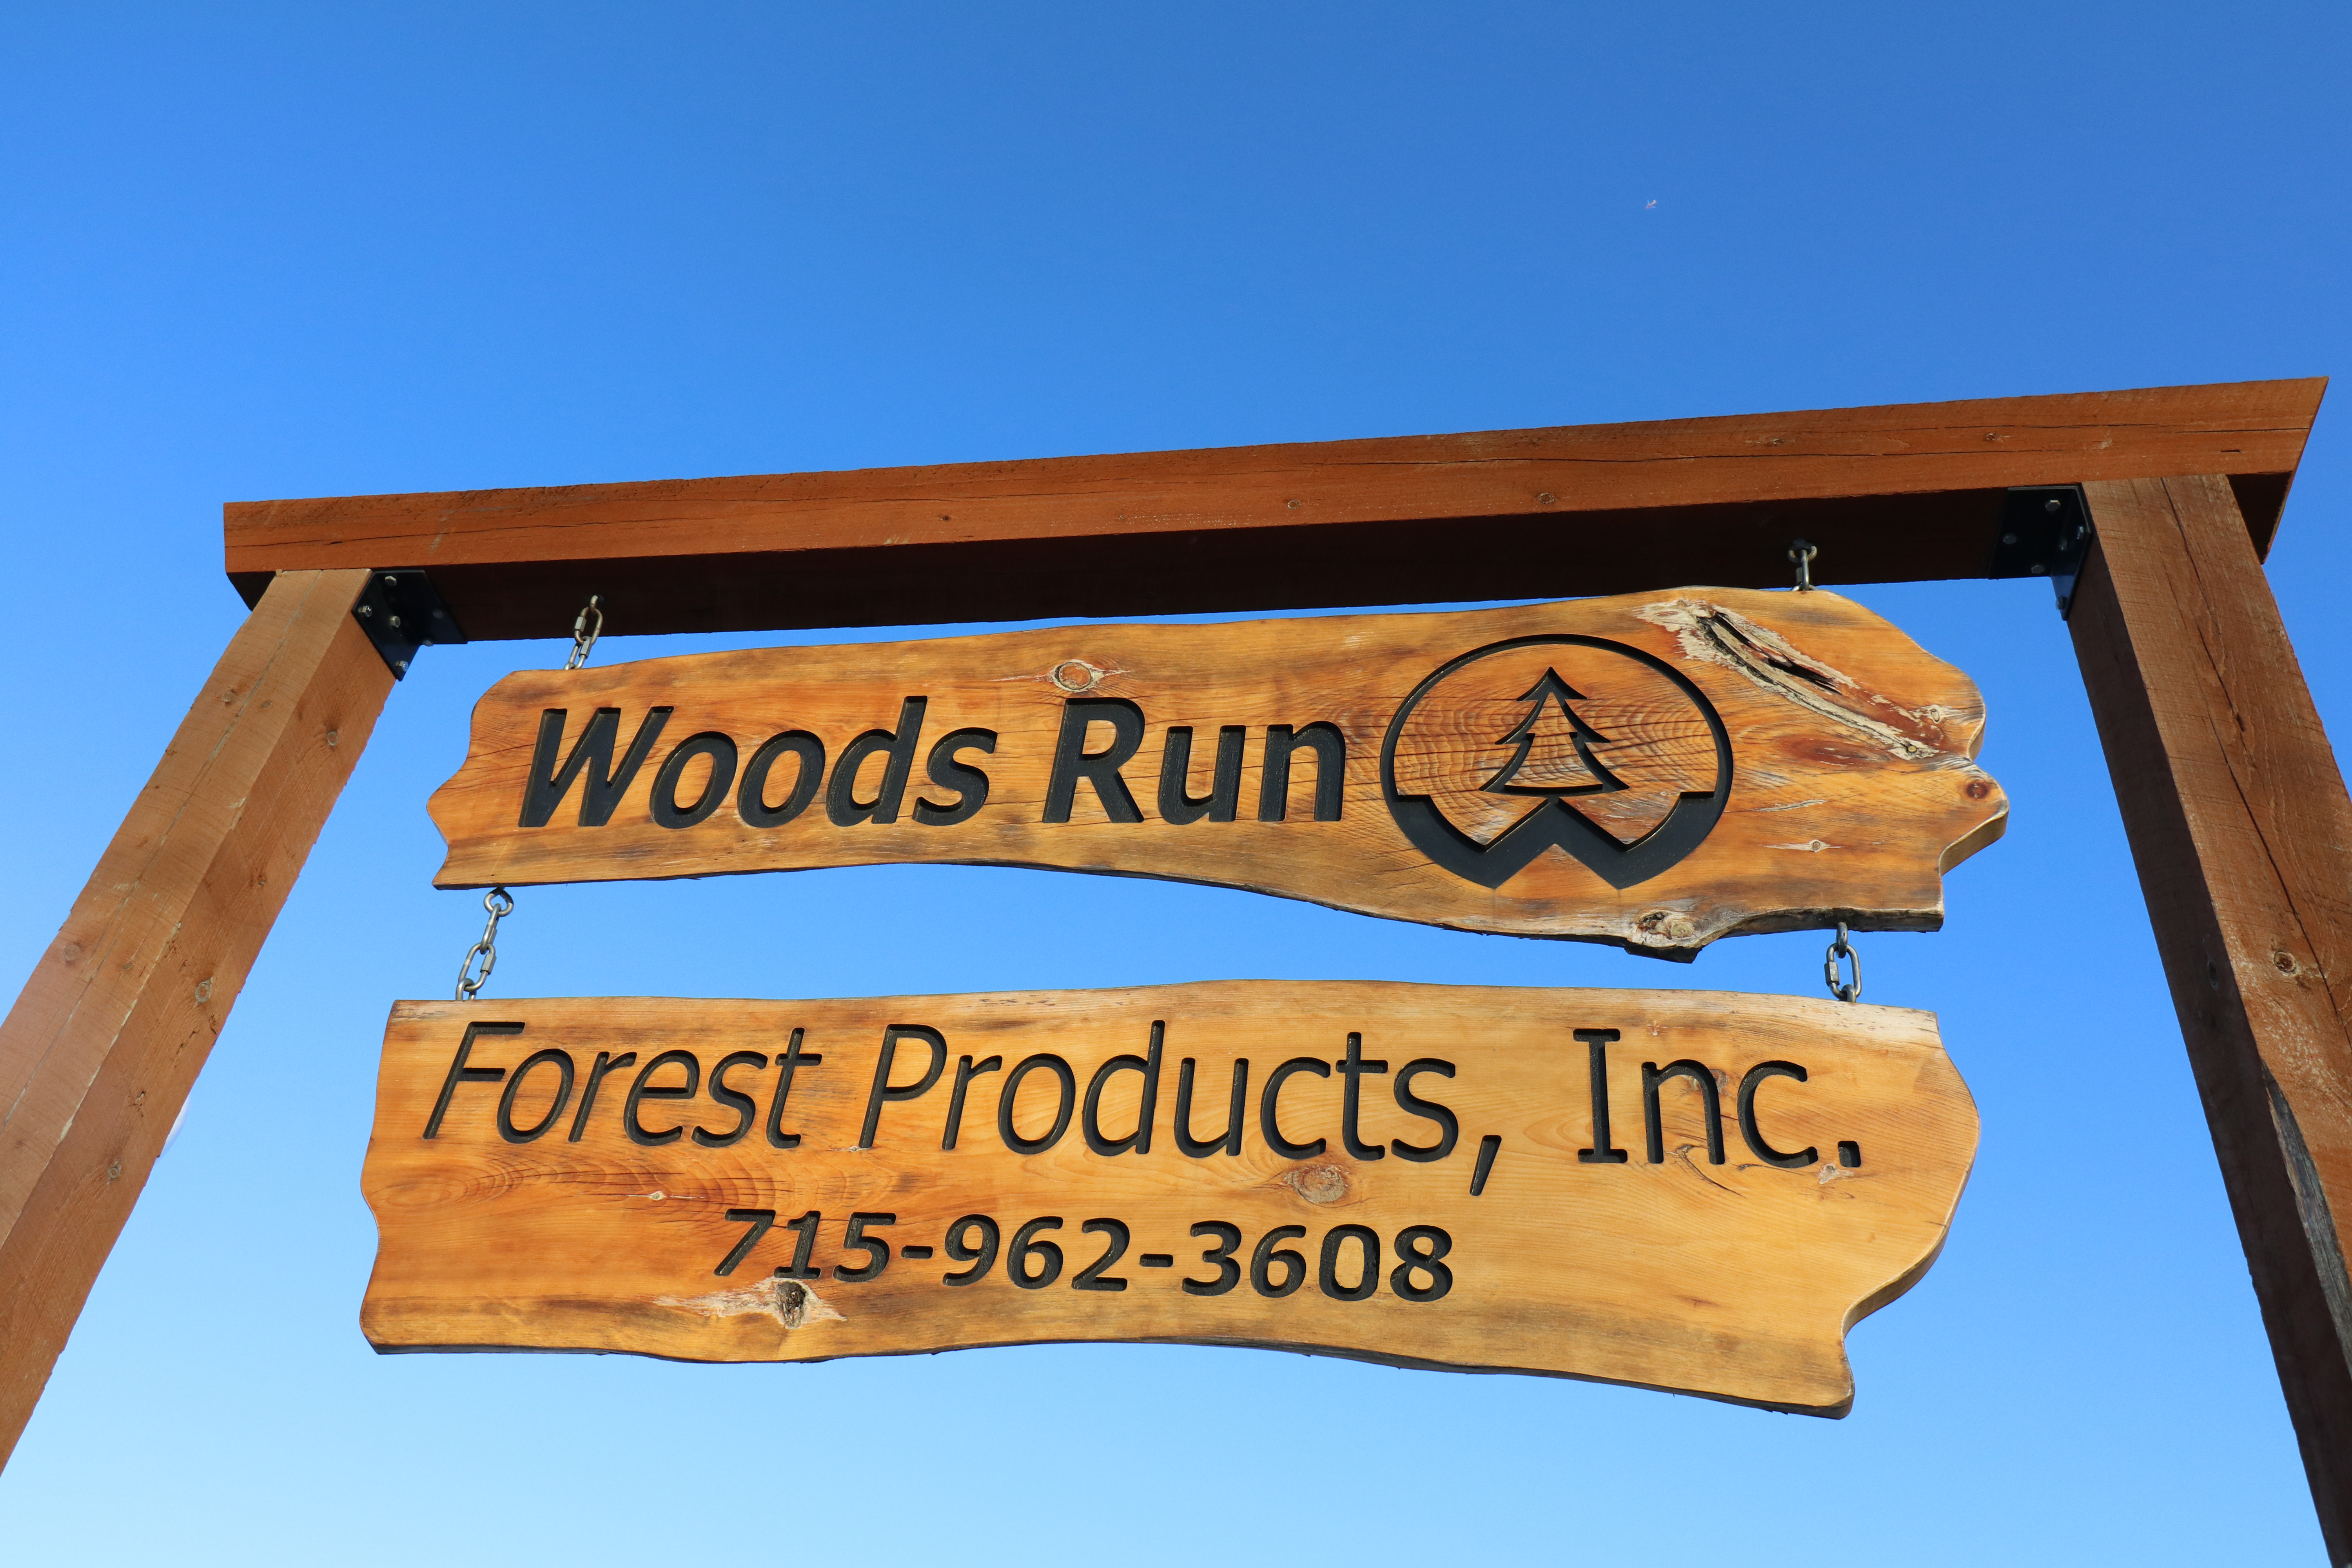 Woods Run Forest Products